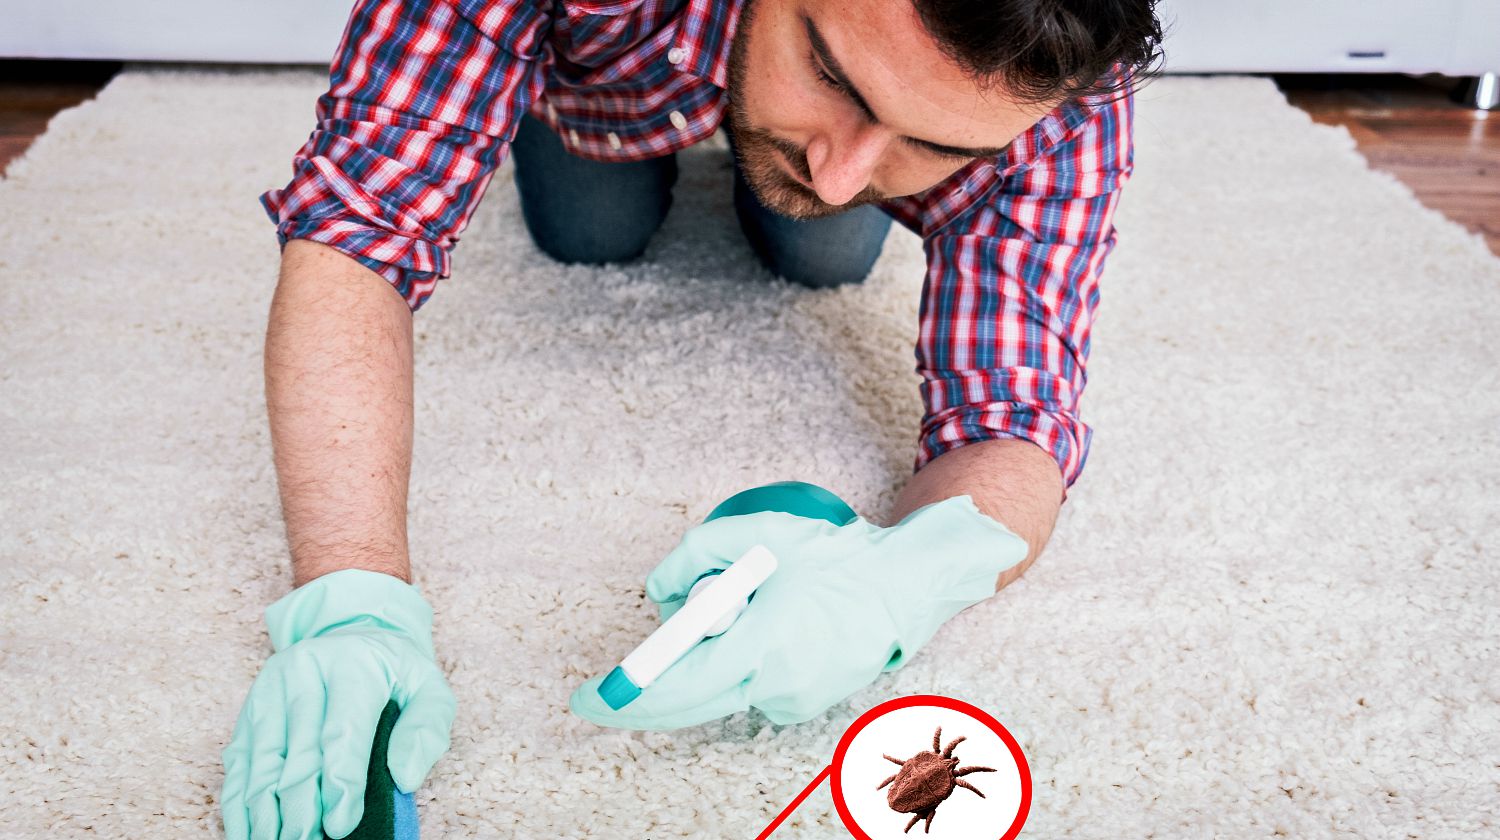 Wiping wooden white carpet and floor with a sponge | Natural Remedies To Get Rid Of Fleas In And Around Your Home | Featured